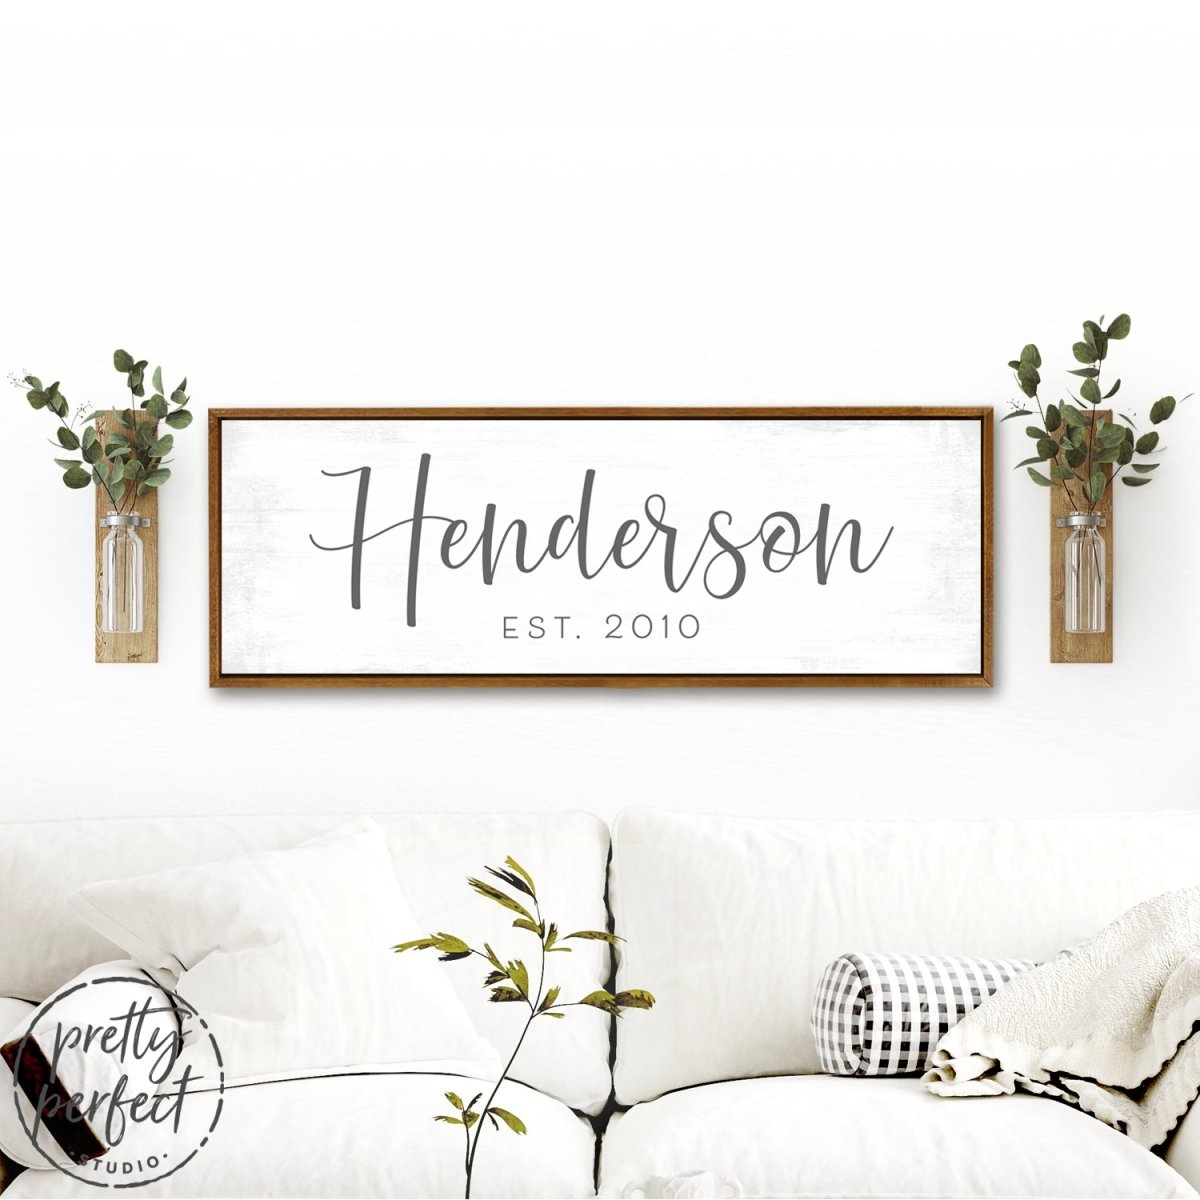 Personalized Family Established Name Signs Above Couch - Pretty Perfect Studio